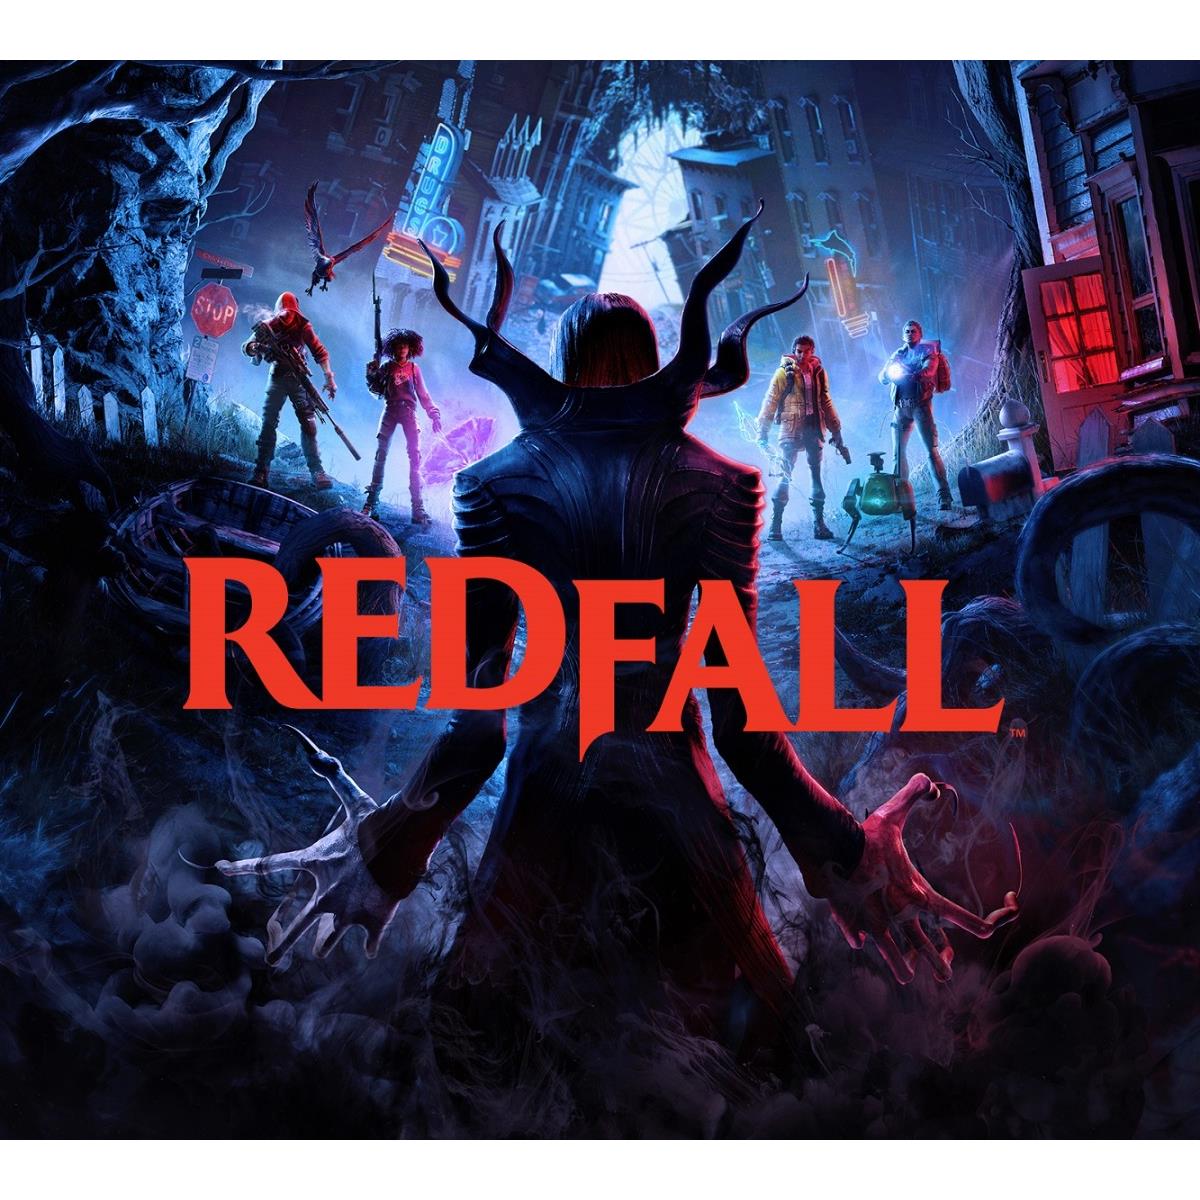 Redfall Graphics Performance Restricted to 30 FPS Quality Mode on